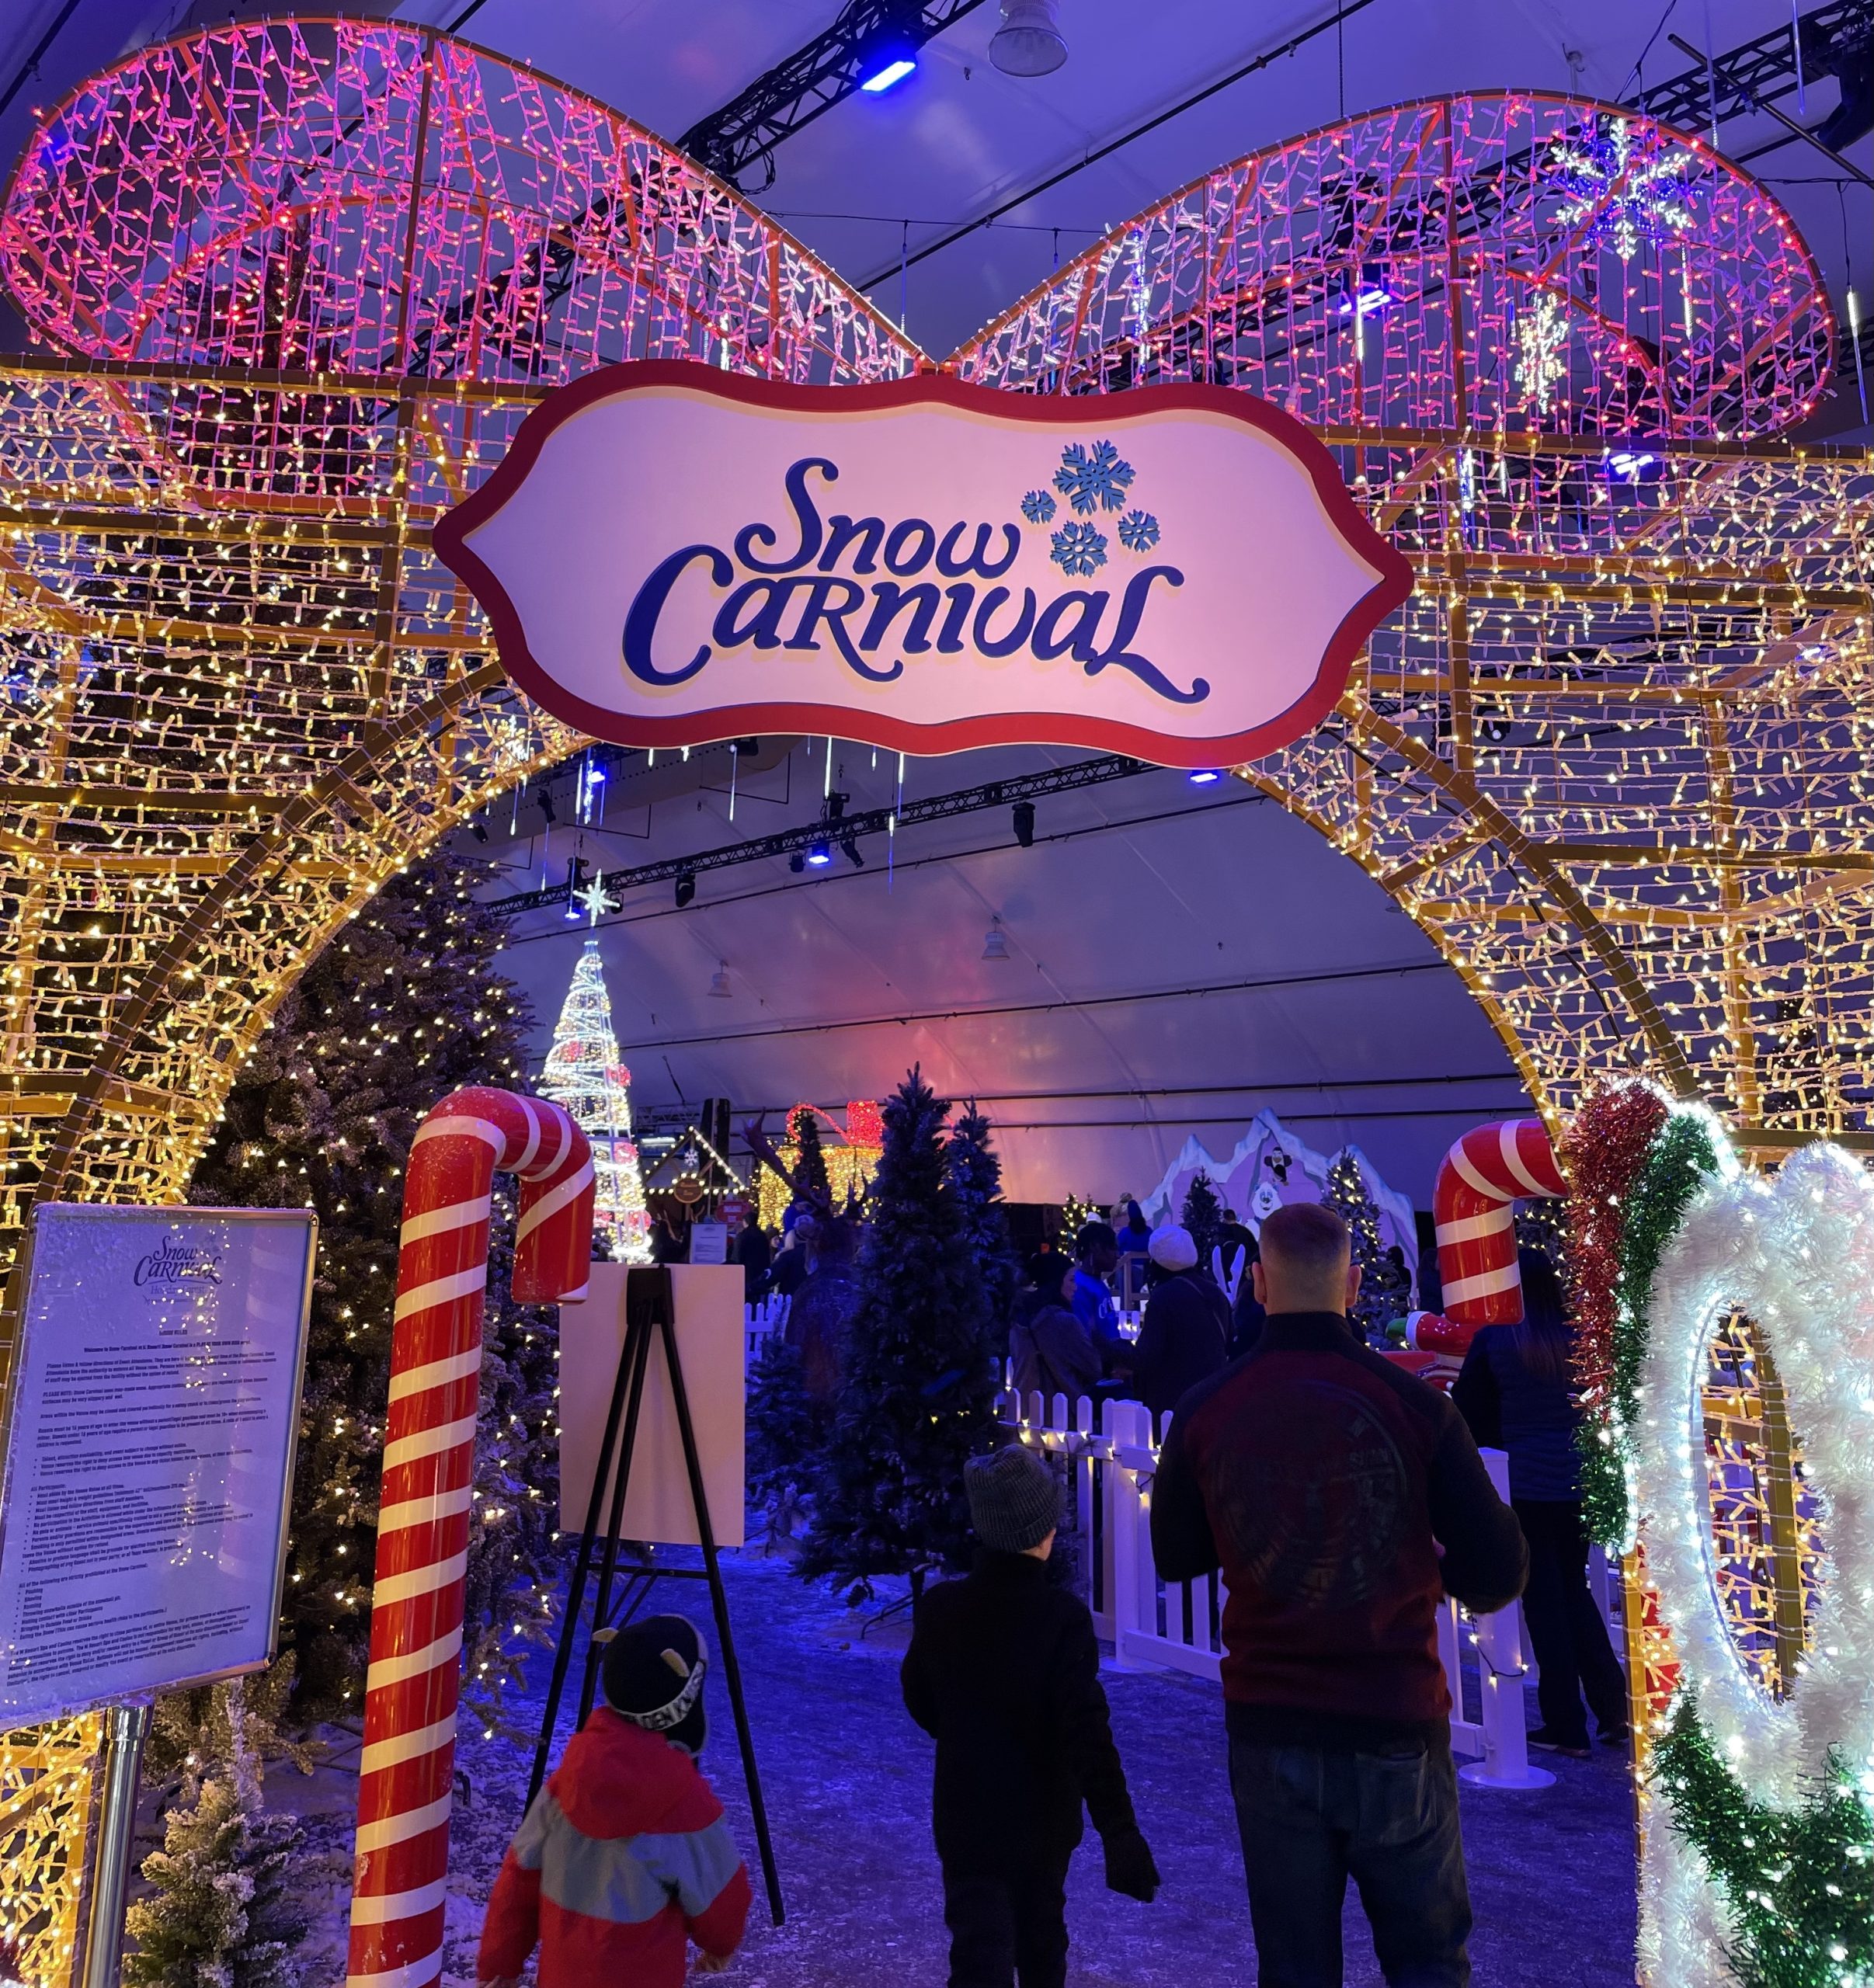 Entrance to Snow Carnival